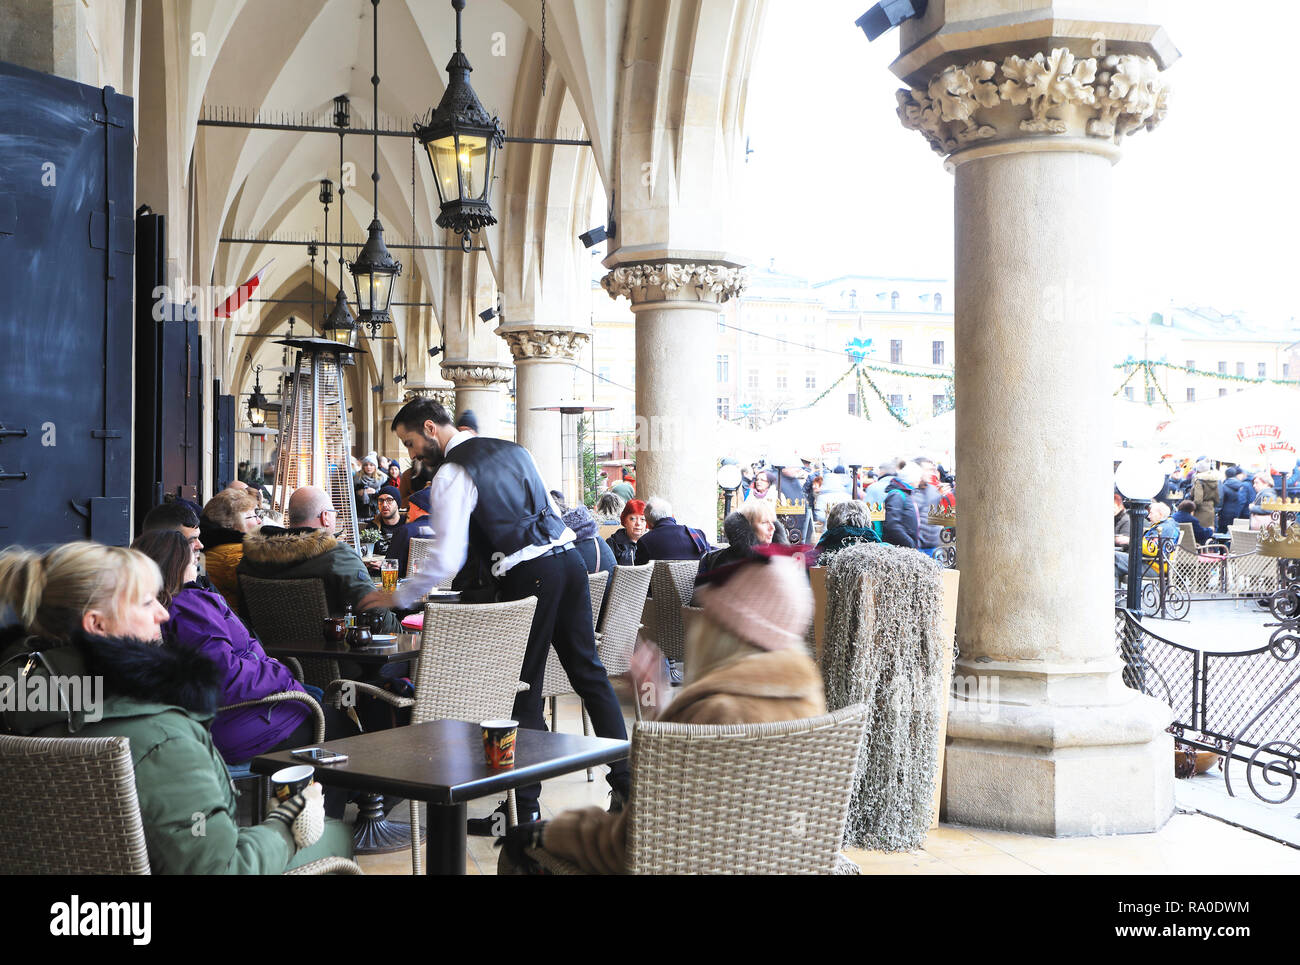 Restaurants at Christmas time, in the arcades of the Cloth Hall, on the Main Market Square, in Krakow, Poland Stock Photo